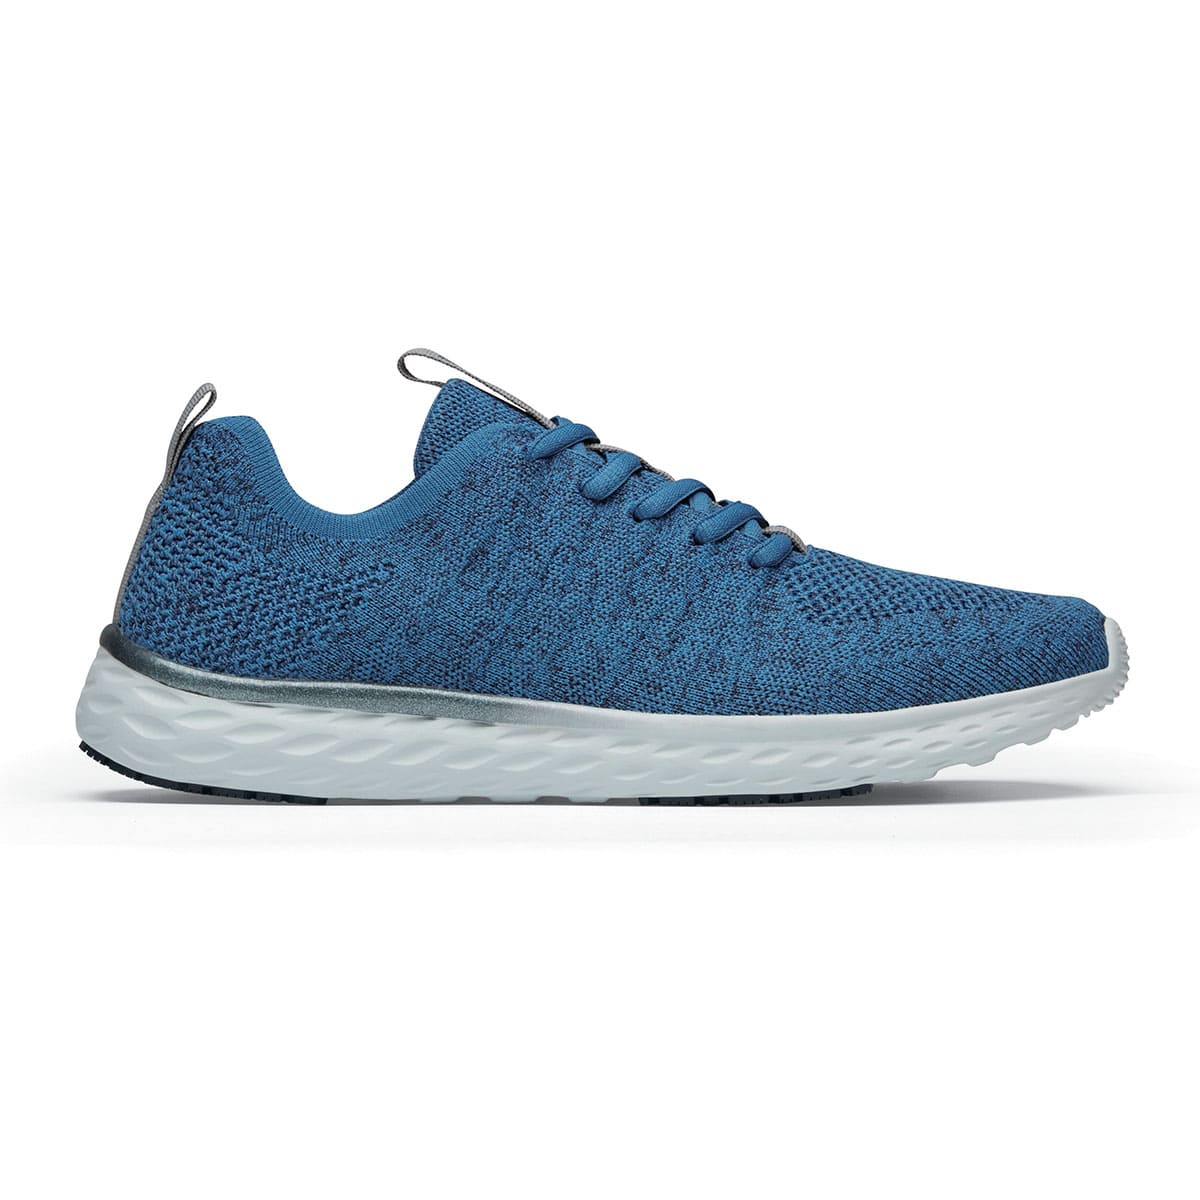 The Everlight Mens Ocean Blue from Shoes For Crews are slip-resistant, breathable, lightweight and easy-to-clean trainers,  seen from the right.